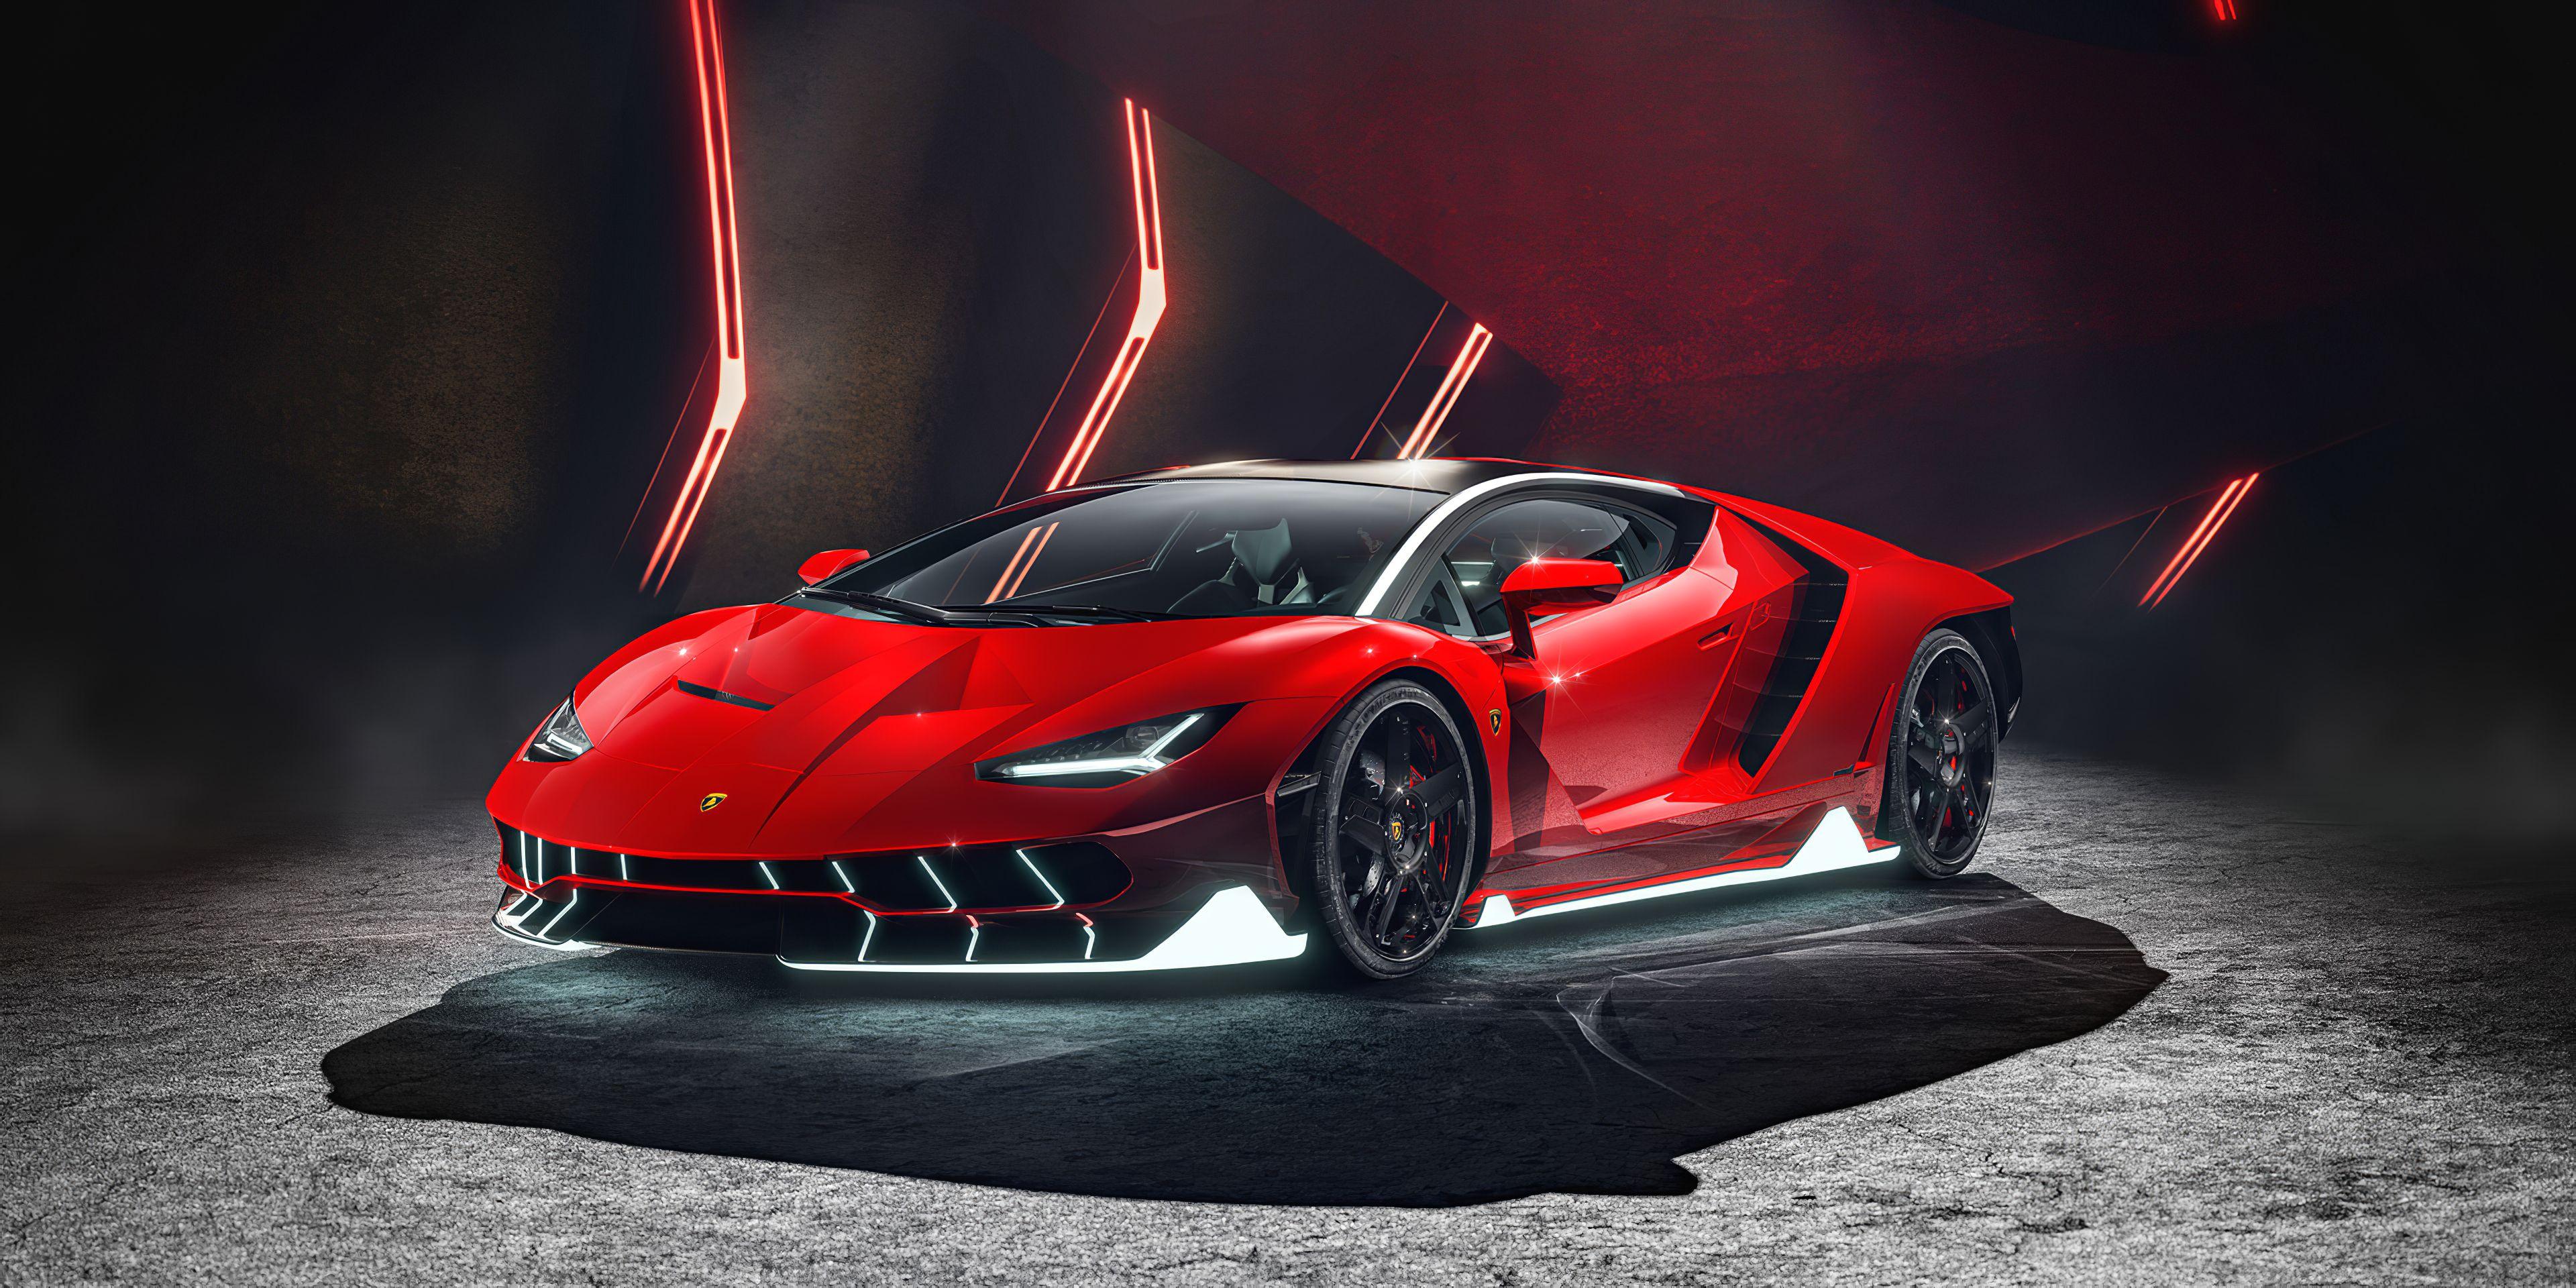 Red Neon Car Wallpapers - Top Free Red Neon Car Backgrounds